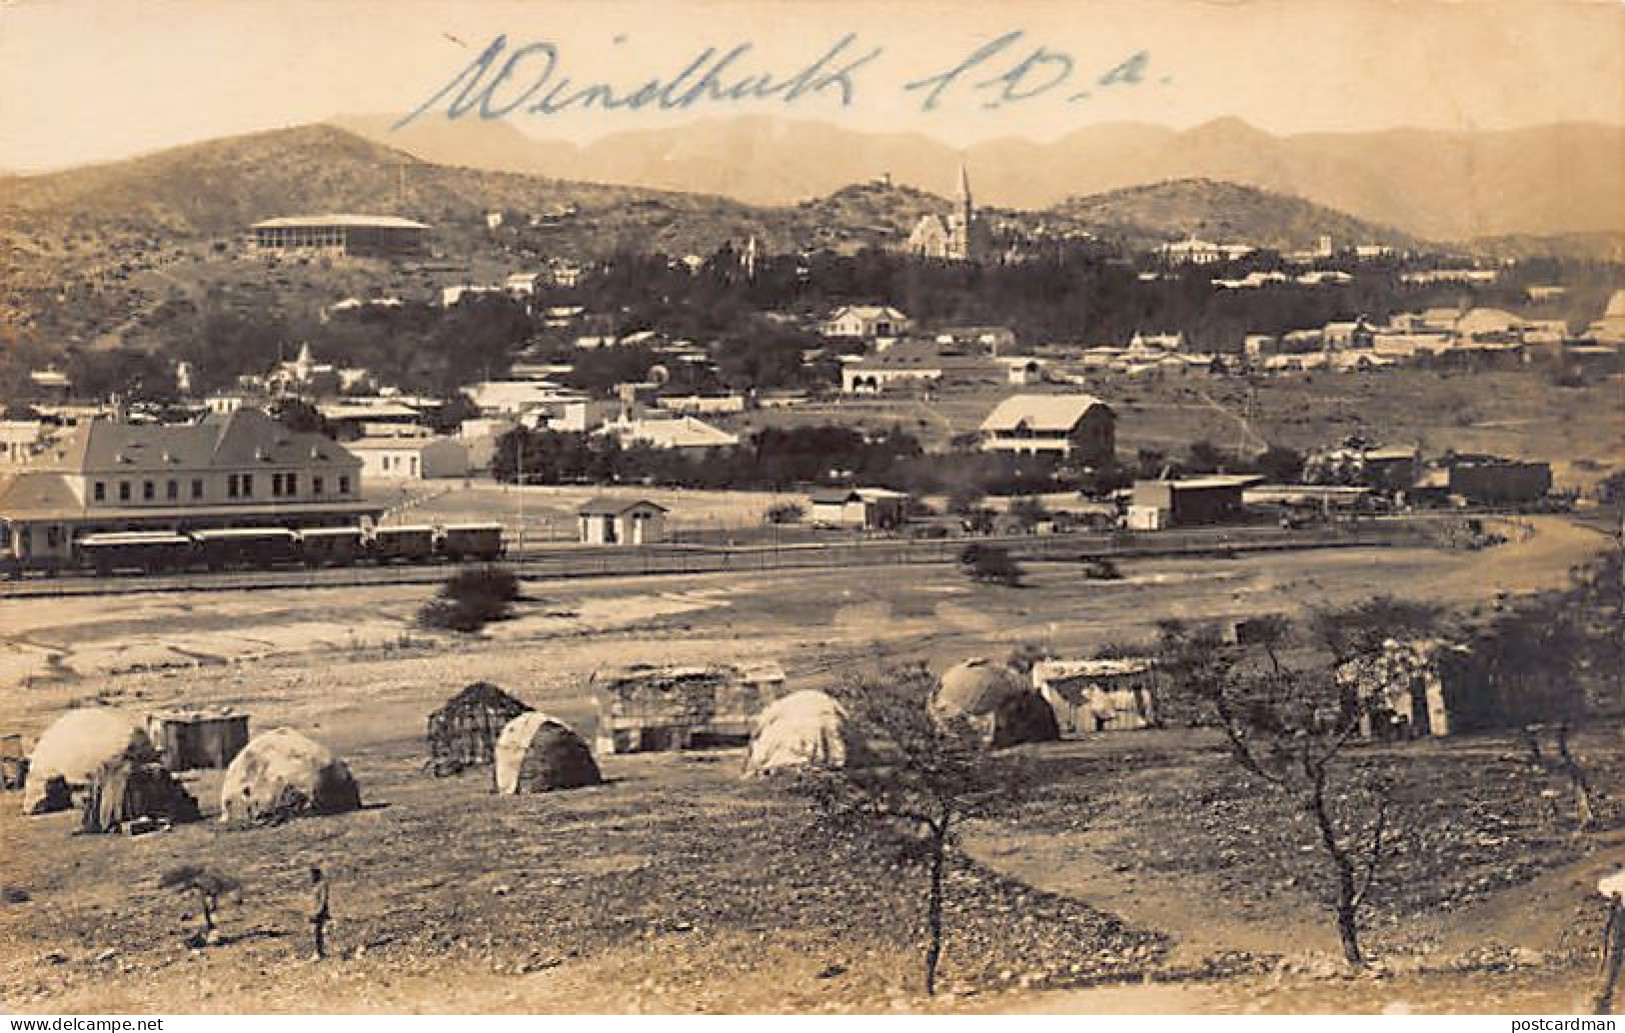 Namibia - WINDHOEK Windhuk - General View With The Railway Station - REAL PHOTO - Publ. F. Nink  - Namibie